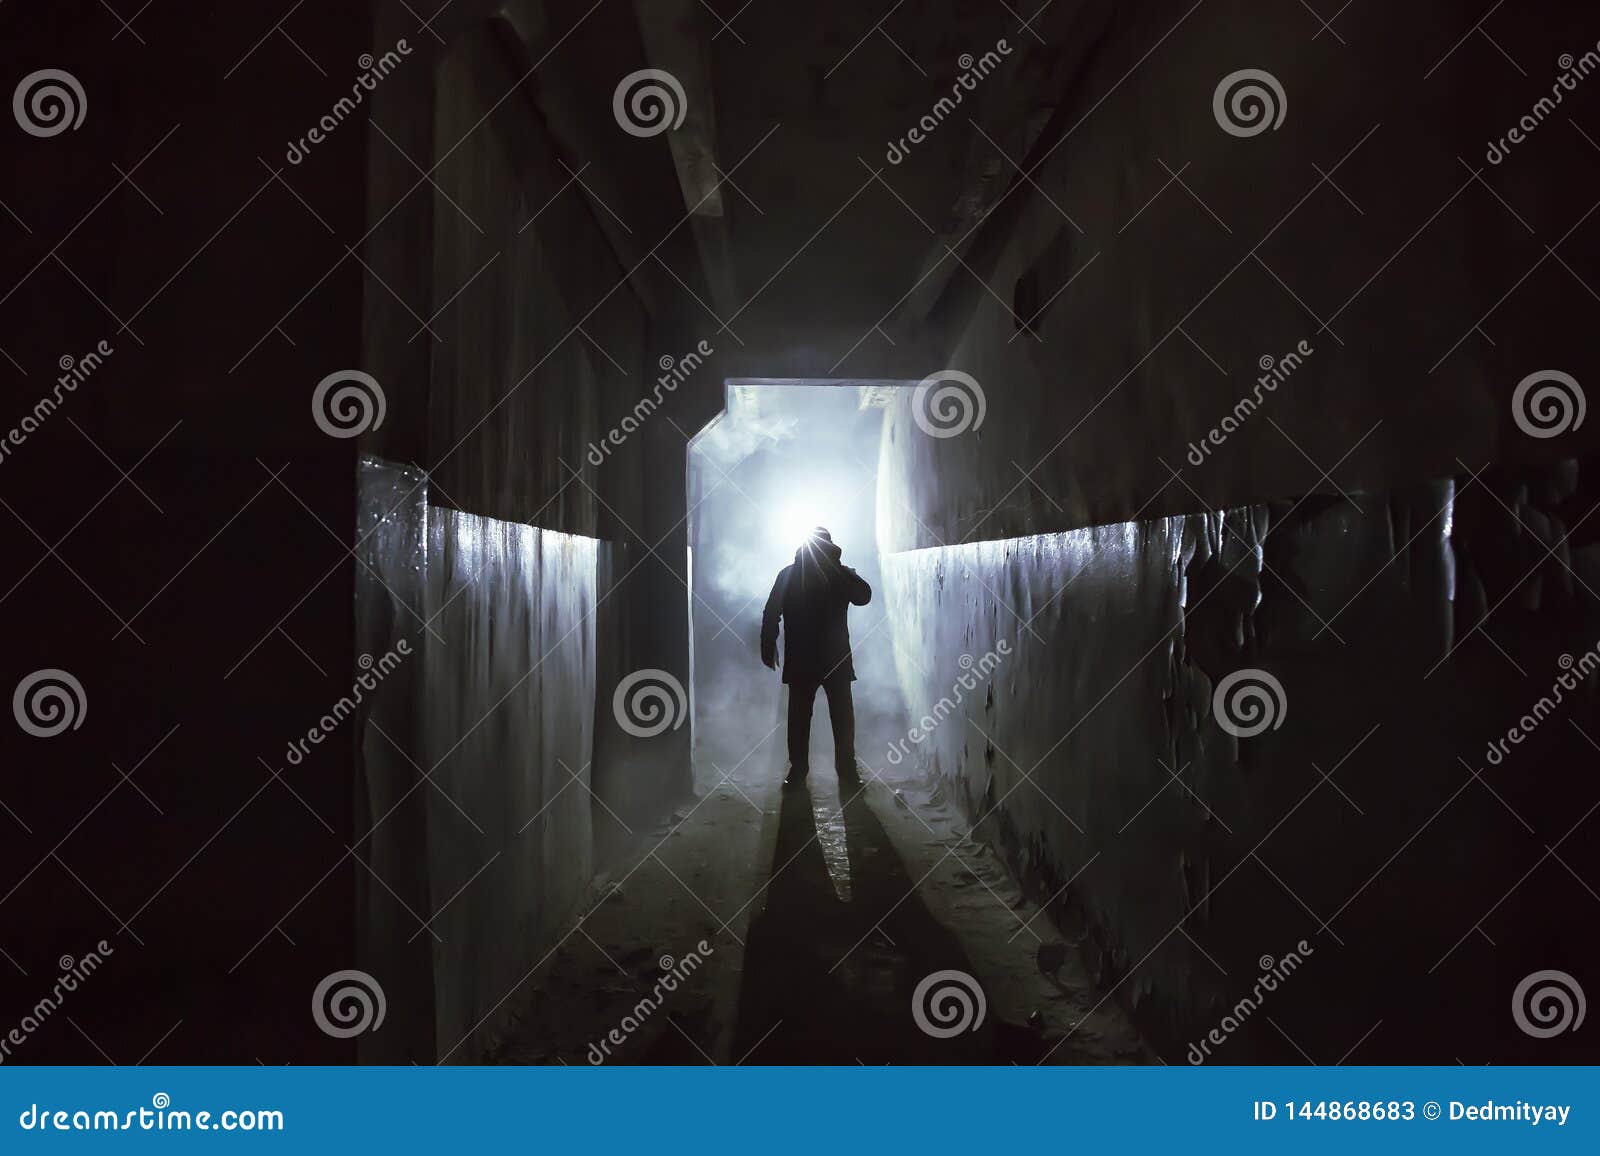 Silhouette Of Man In Standing In Dark Scary Corridor Or Tunnel With ... Silhouette Man Walking Tunnel